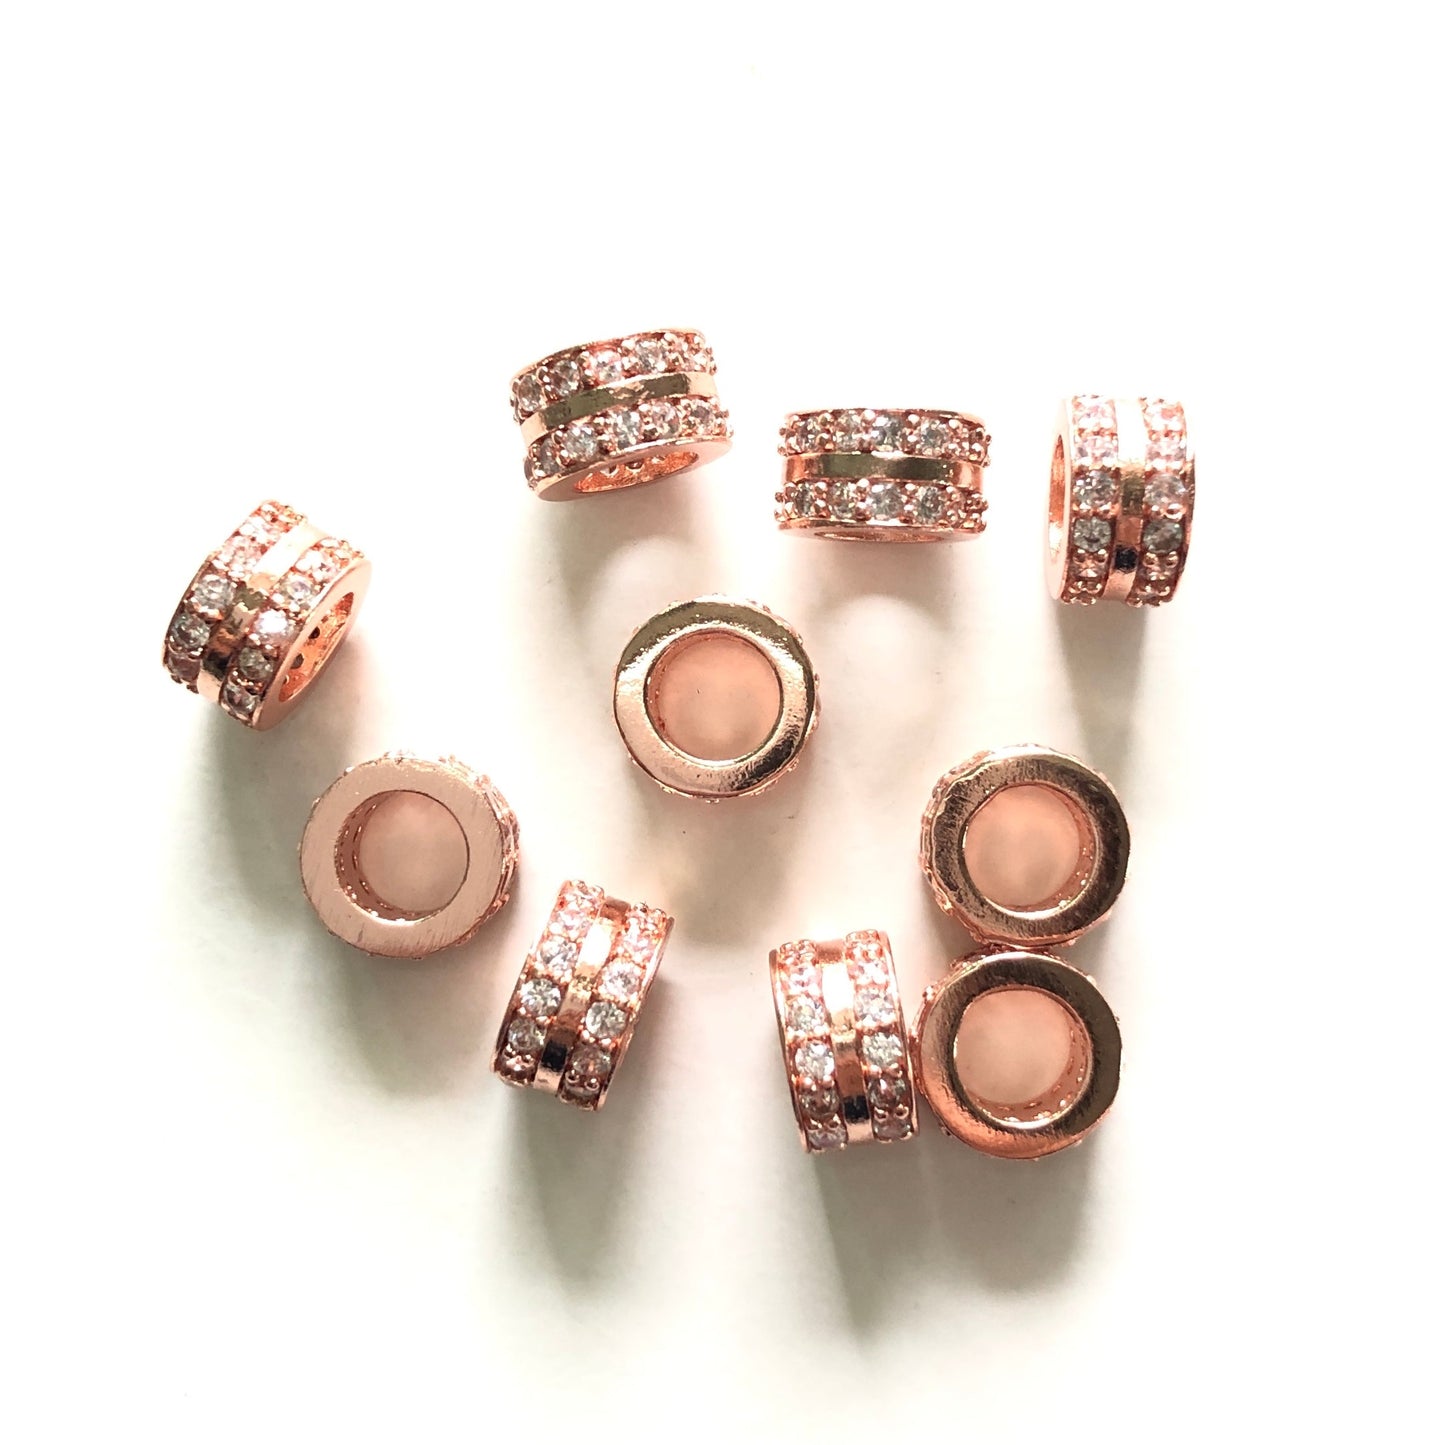 20pcs/lot 8.5*5.2mm Clear CZ Paved Wheel Rondelle Spacers Rose Gold CZ Paved Spacers Rondelle Beads Charms Beads Beyond